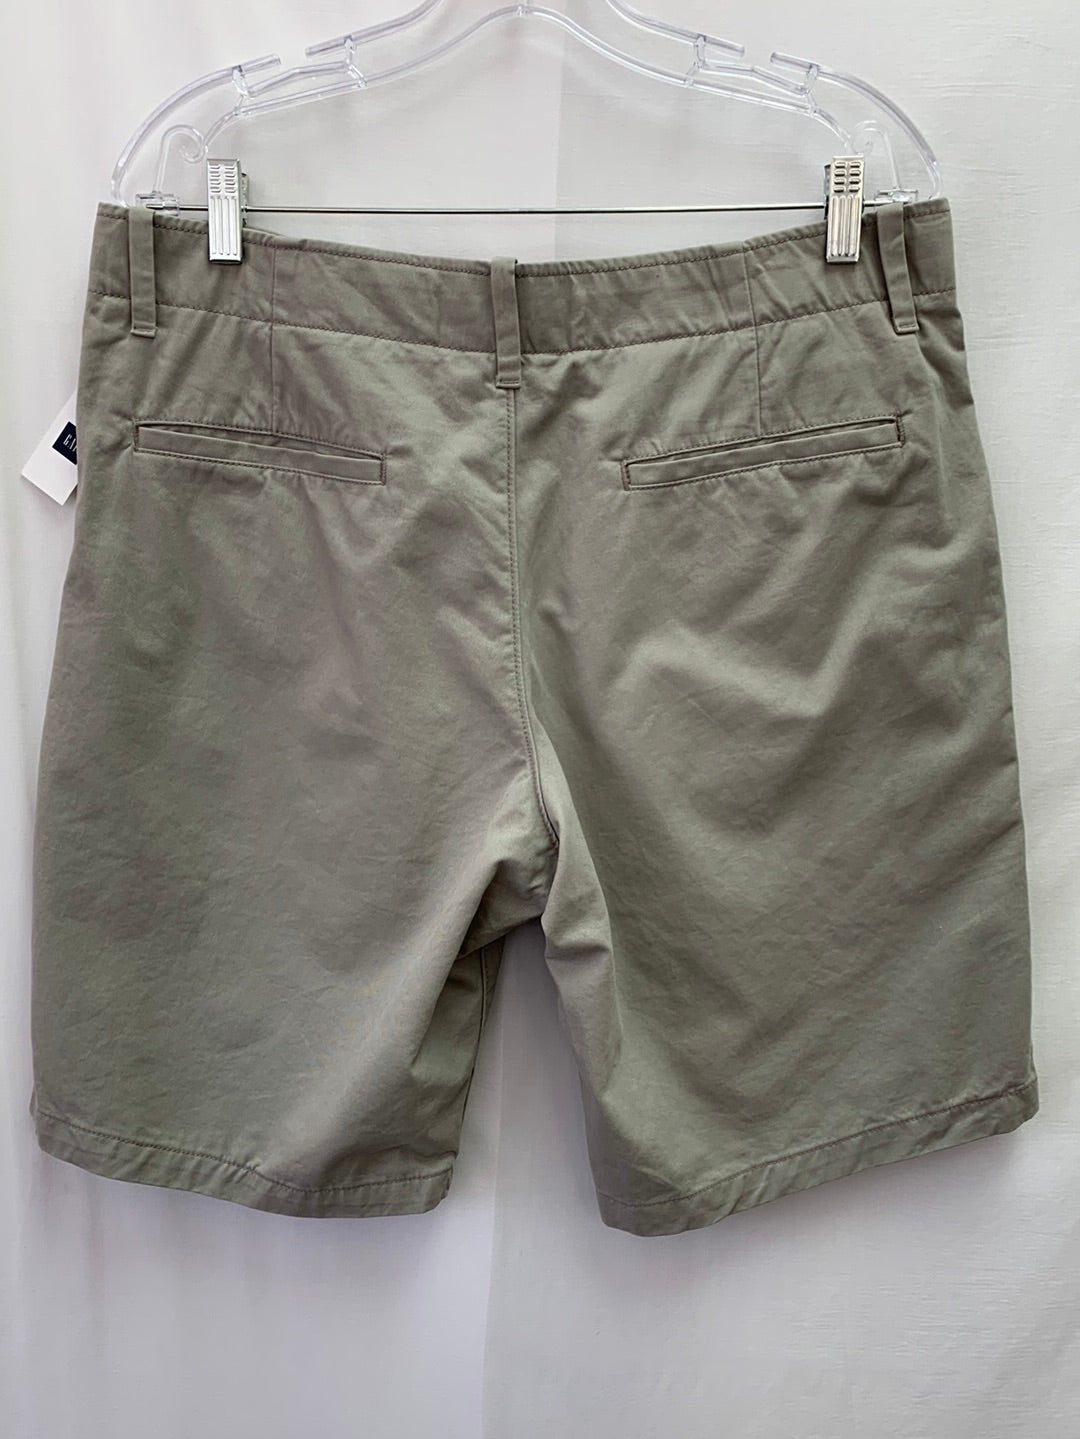 NWT - GAP khaki Lived-In Cotton Flat Front Shorts - Men's 34